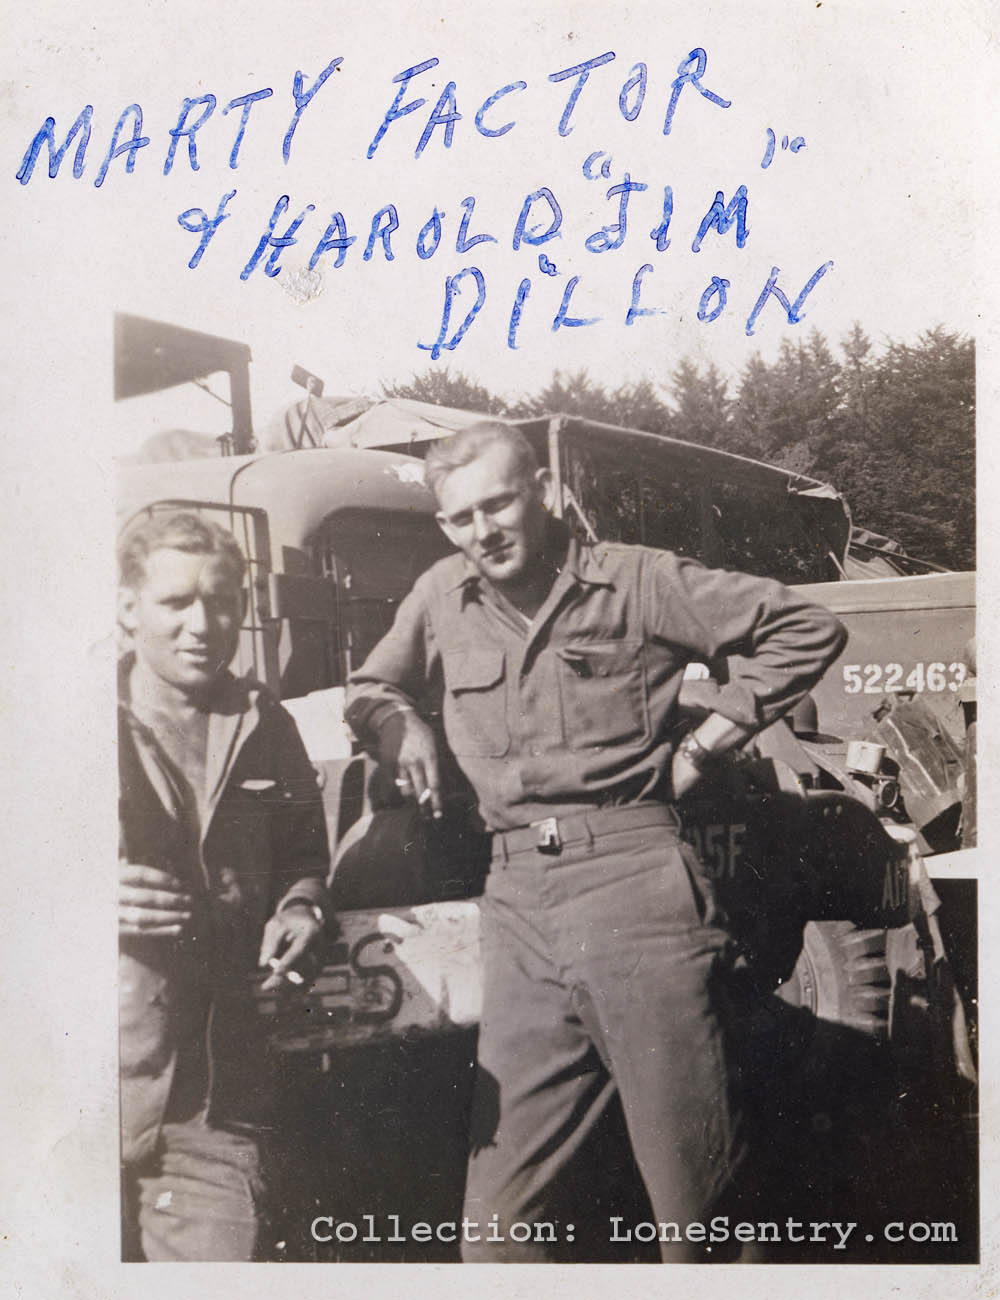 Marty Factor and Harold 'Jim' Dillon of the 995th Field Artillery Battalion.